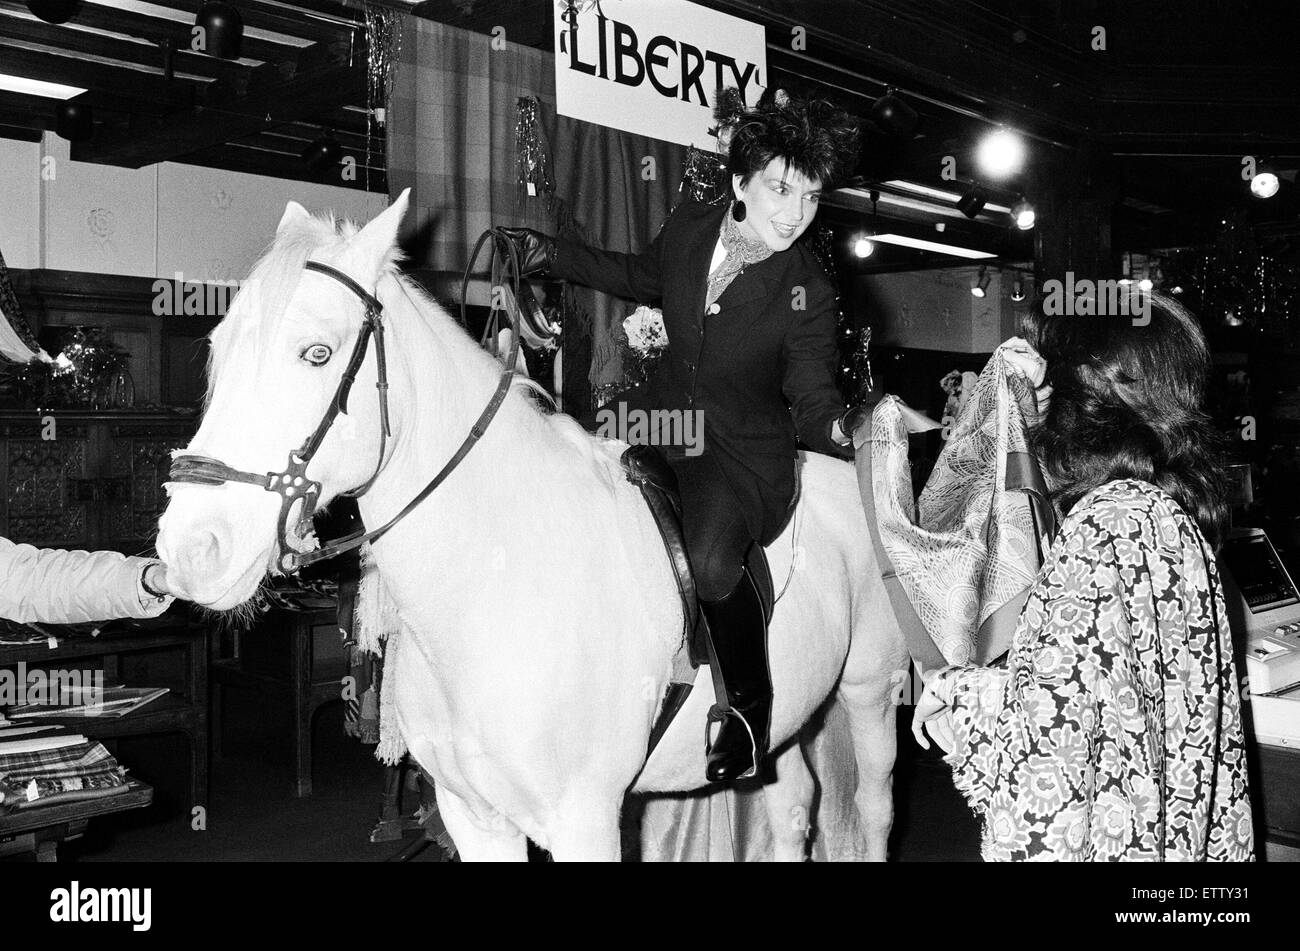 Pop singer and actress Toyah Willcox has always wanted to do her Christmas shopping on horseback! With a little help from TV-am's 'Fantasy Time', and Liberty's in Regent Street, Toyah rode a white horse called Messenger through the store. Shop assistants Stock Photo